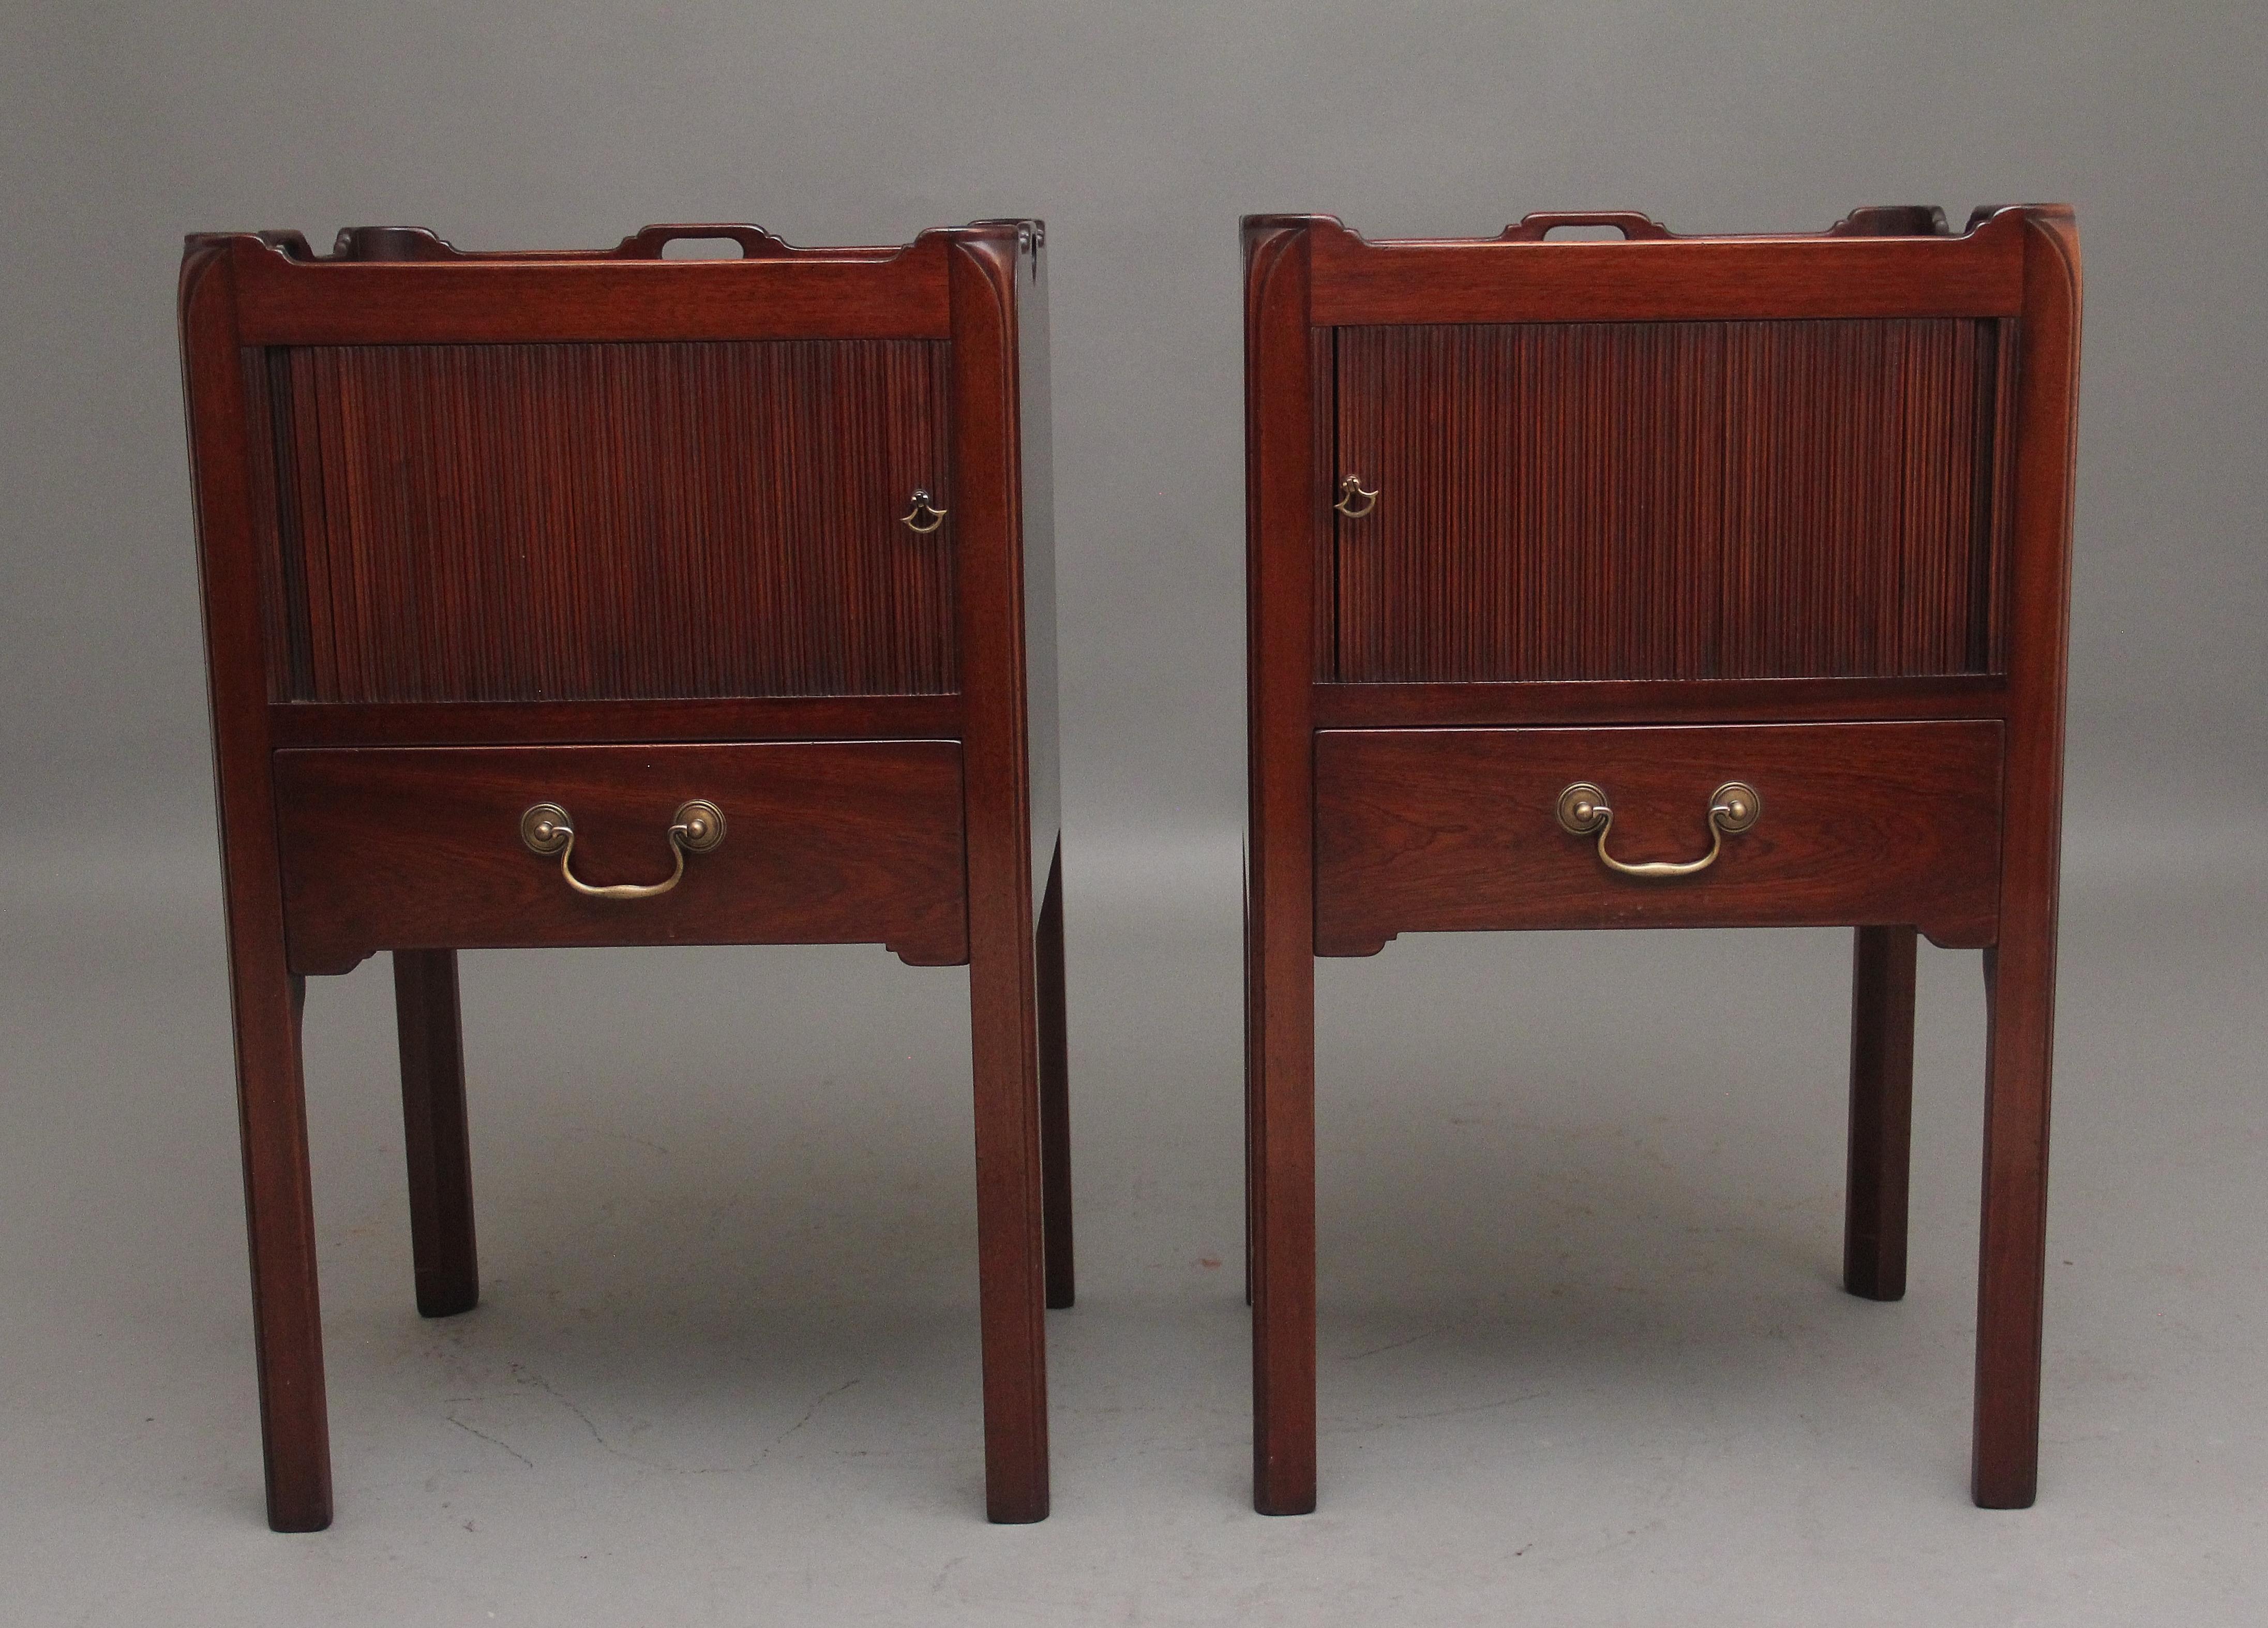 A pair of mahogany tray top bedside cabinets in the Georgian style, having fretted handles on the top moulding, the cupboard below having a tambour front with a mahogany lined drawer below with a brass swan neck handle, standing on chamfered legs. 